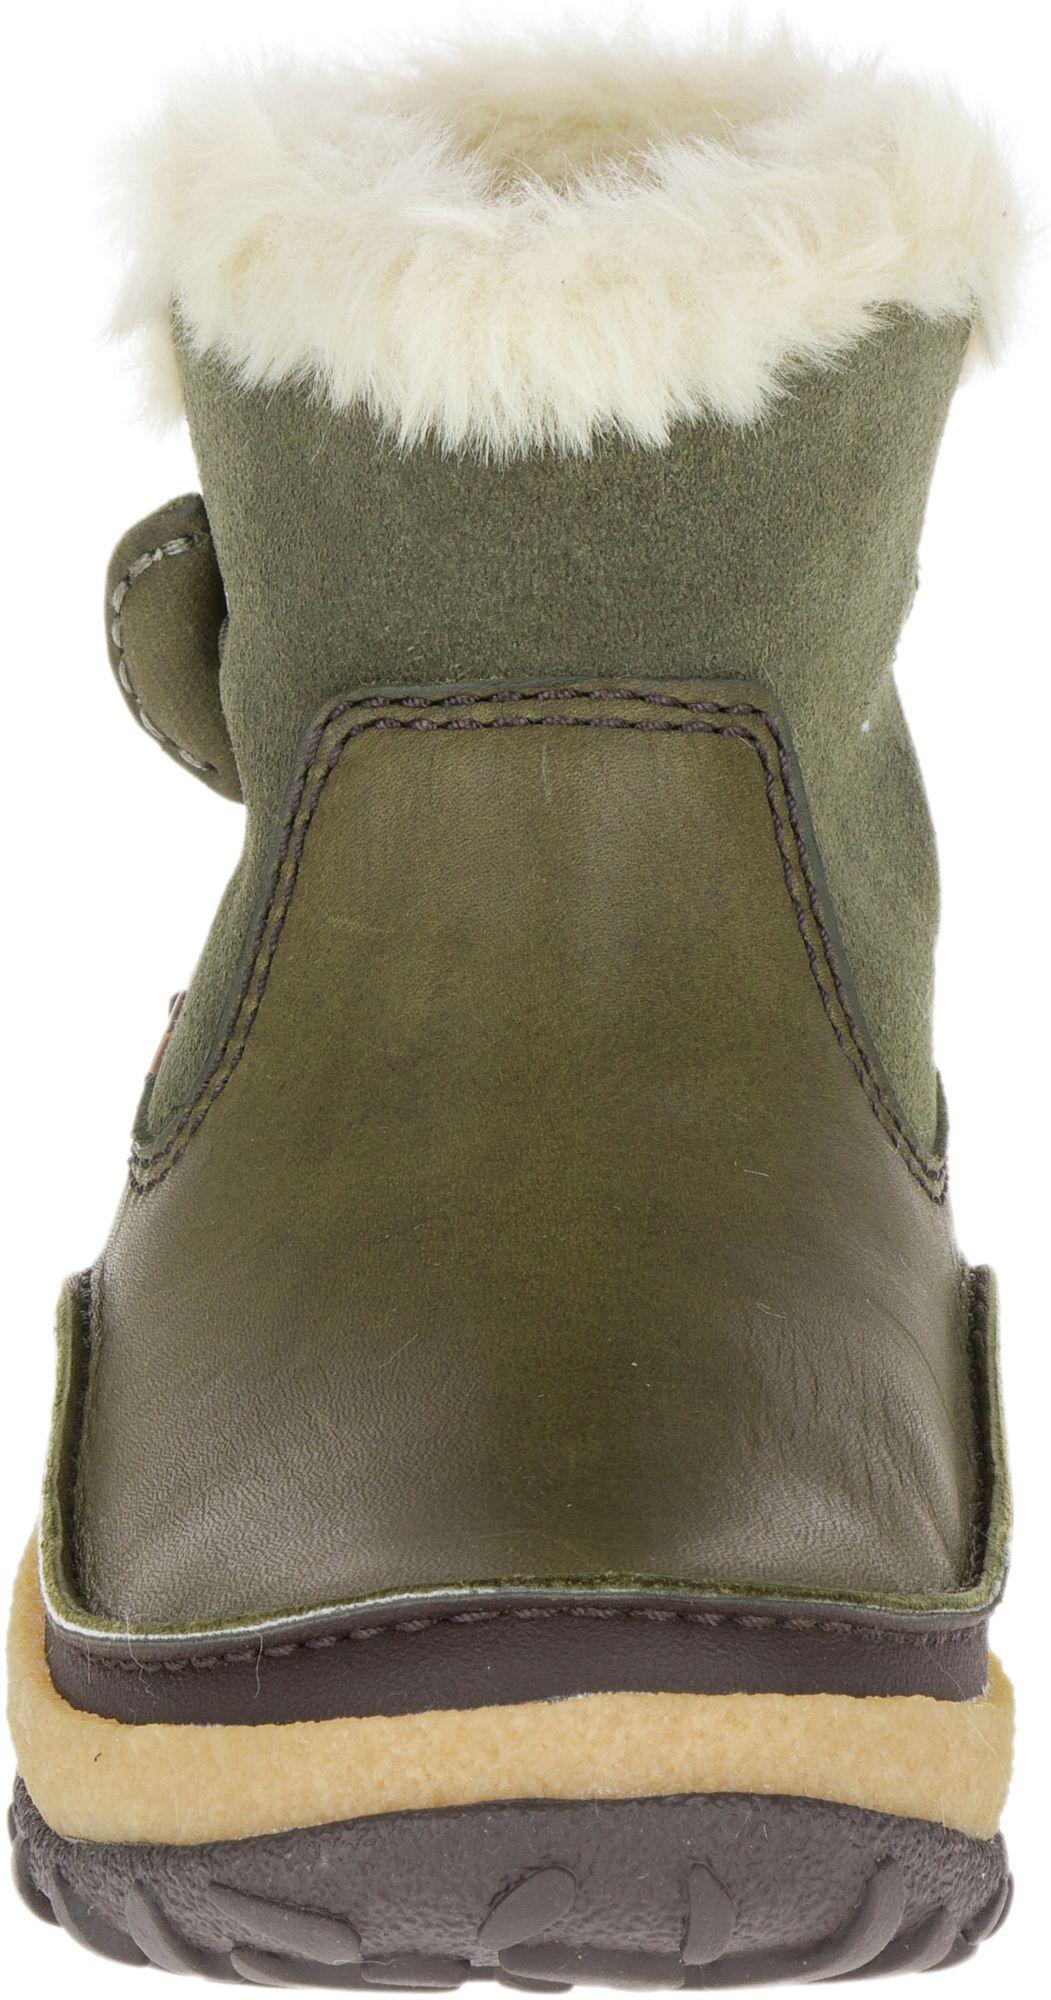 Merrell Tremblant Pull On Polar Waterproof Snow Boot in Dusty Olive (Green)  - Lyst